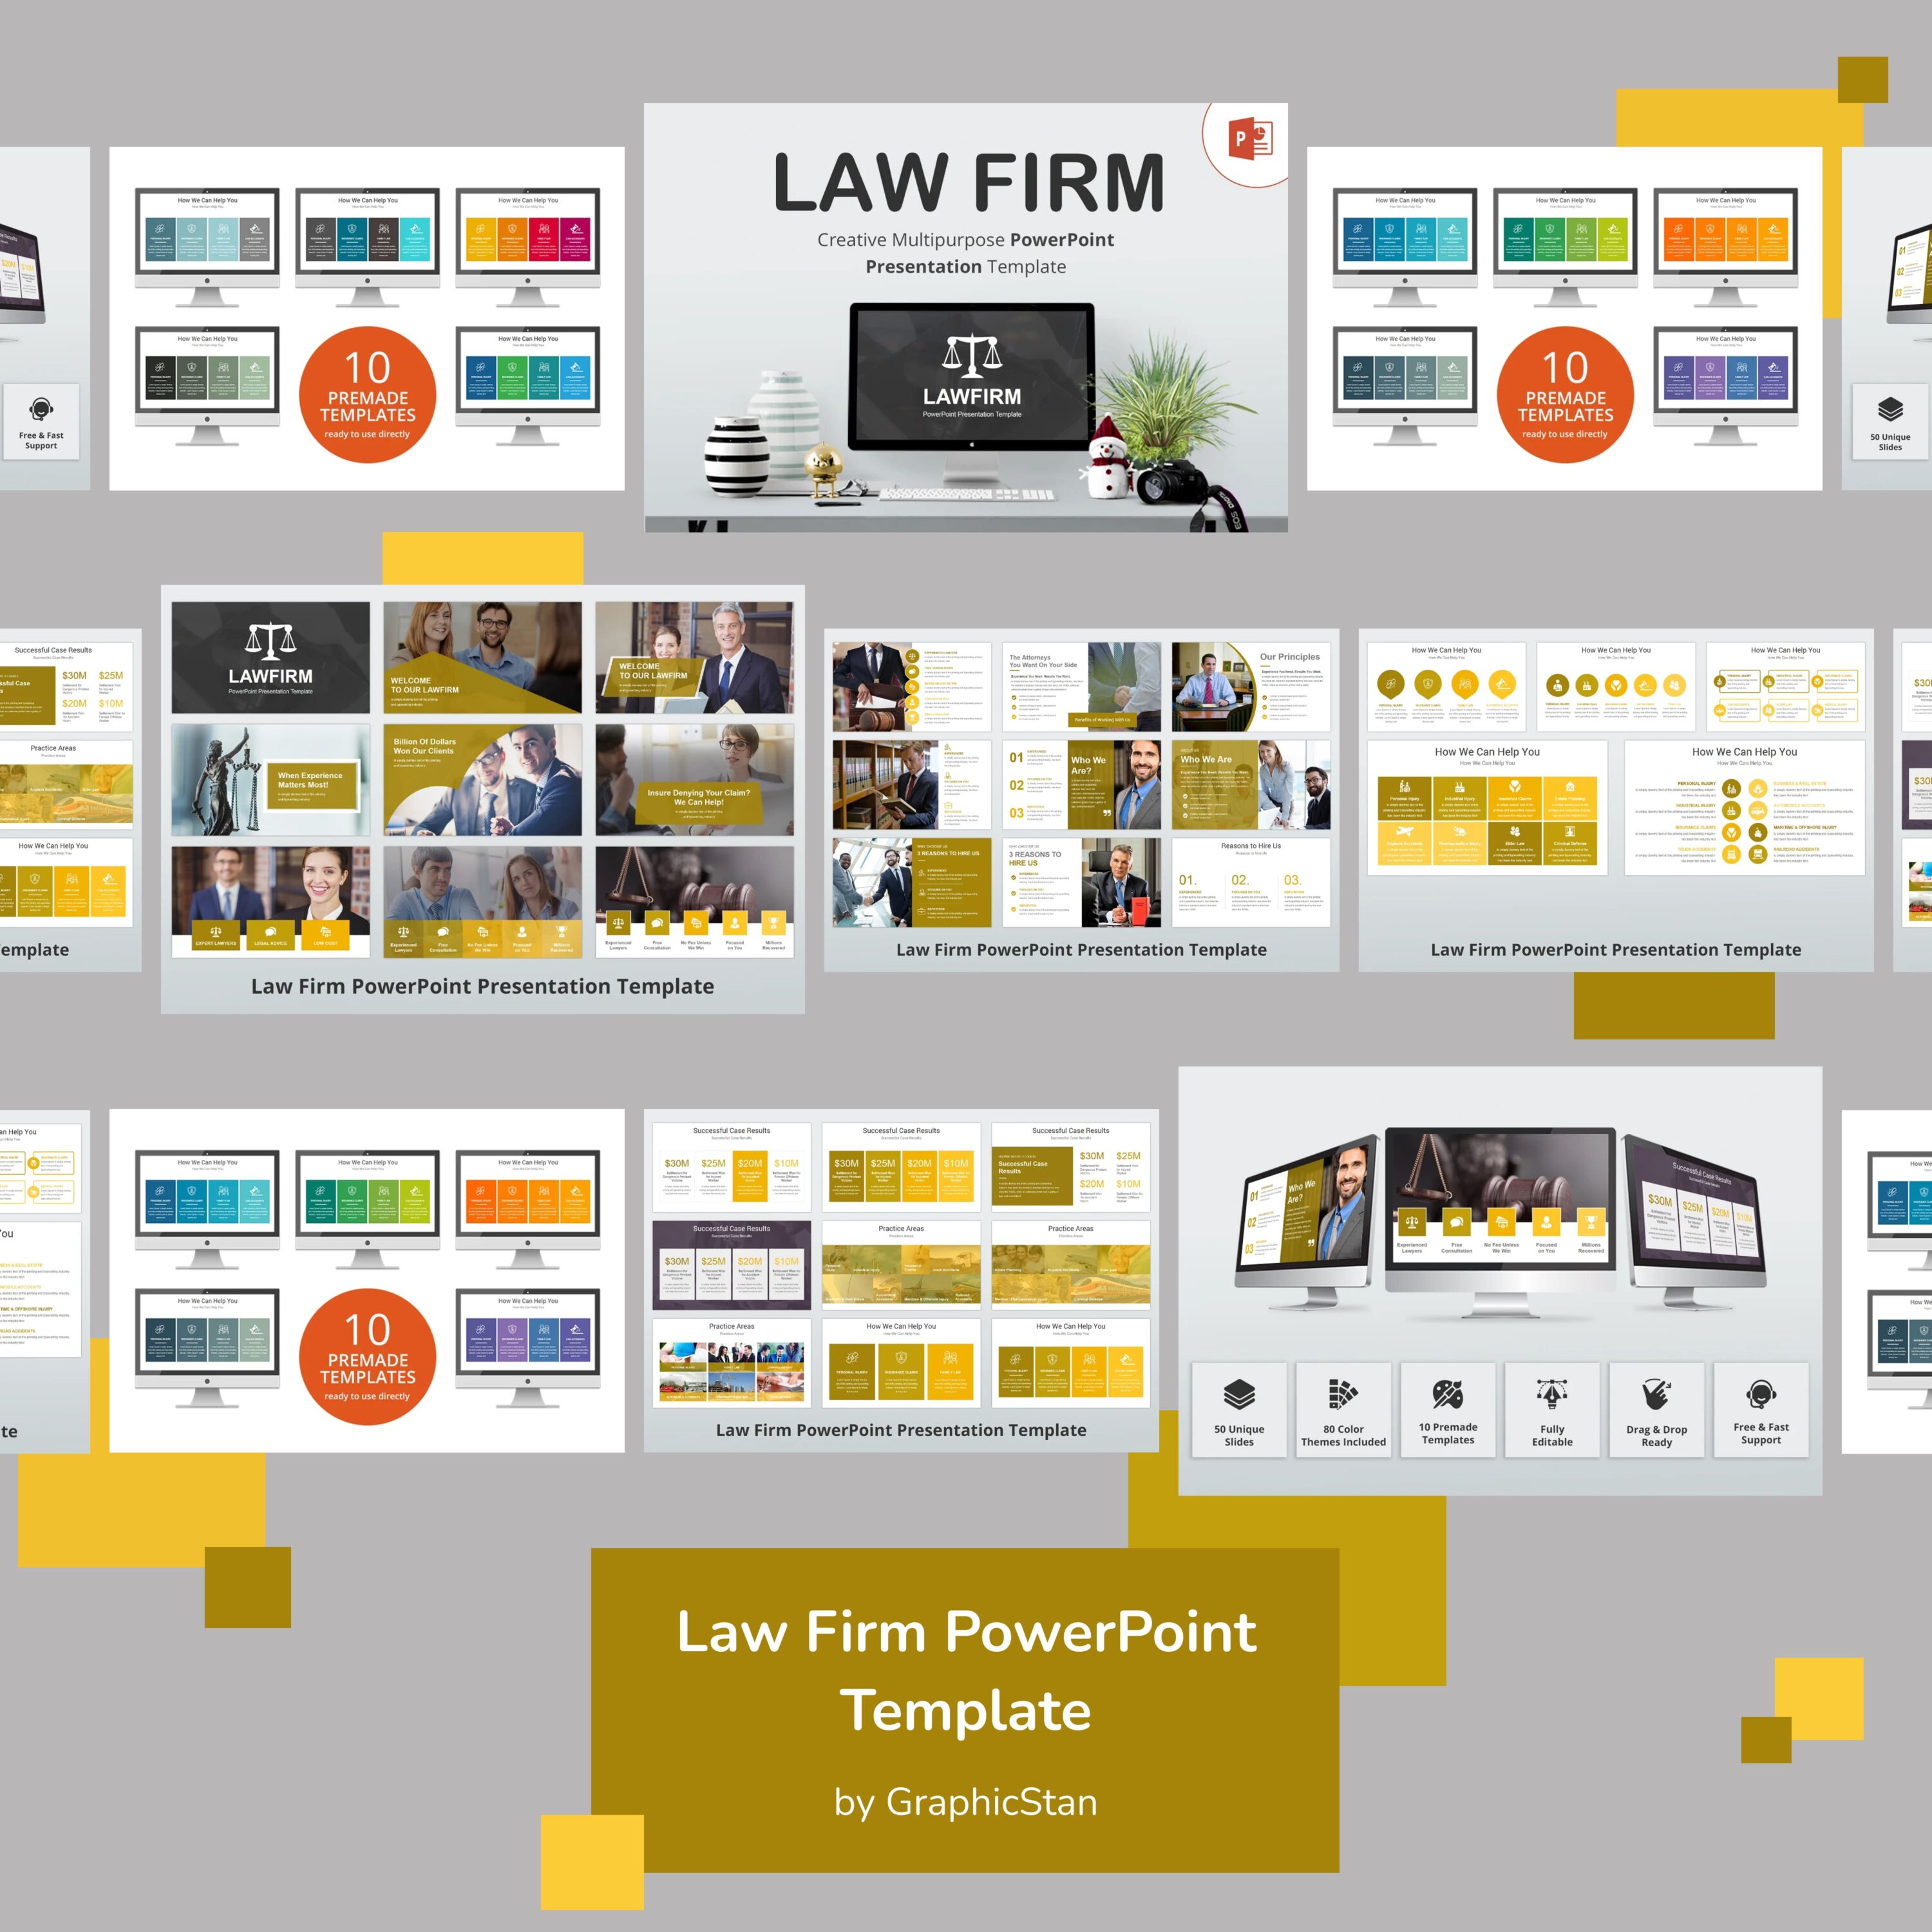 2law firm powerpoint template.